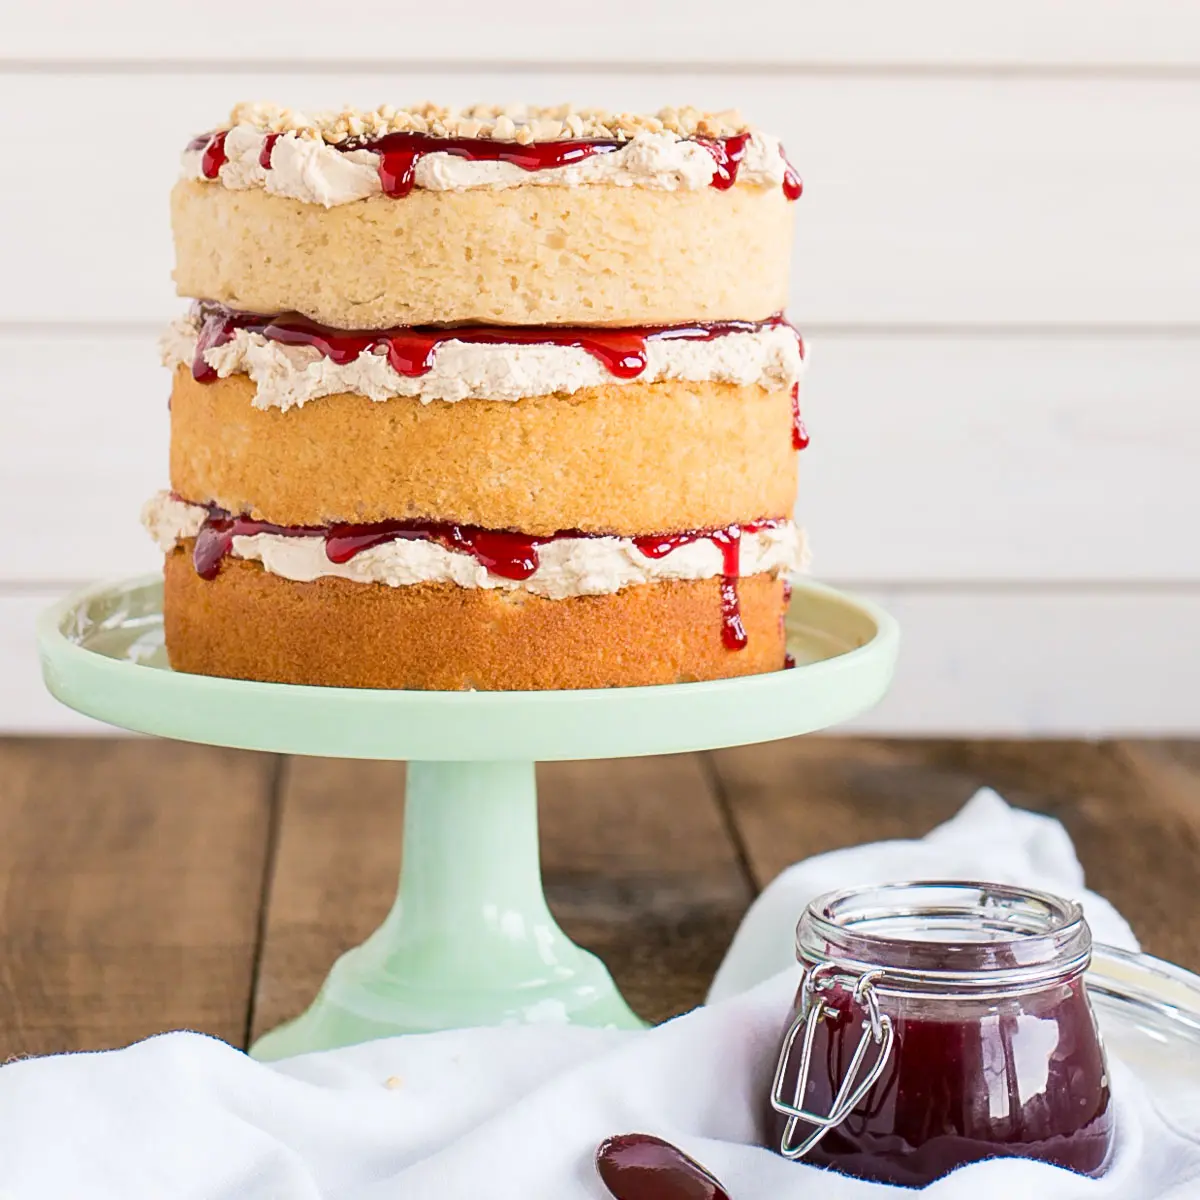 Sponge cake with fruit and jelly - Jacek Placek - Homemade cakes, Cakes,  Cookies